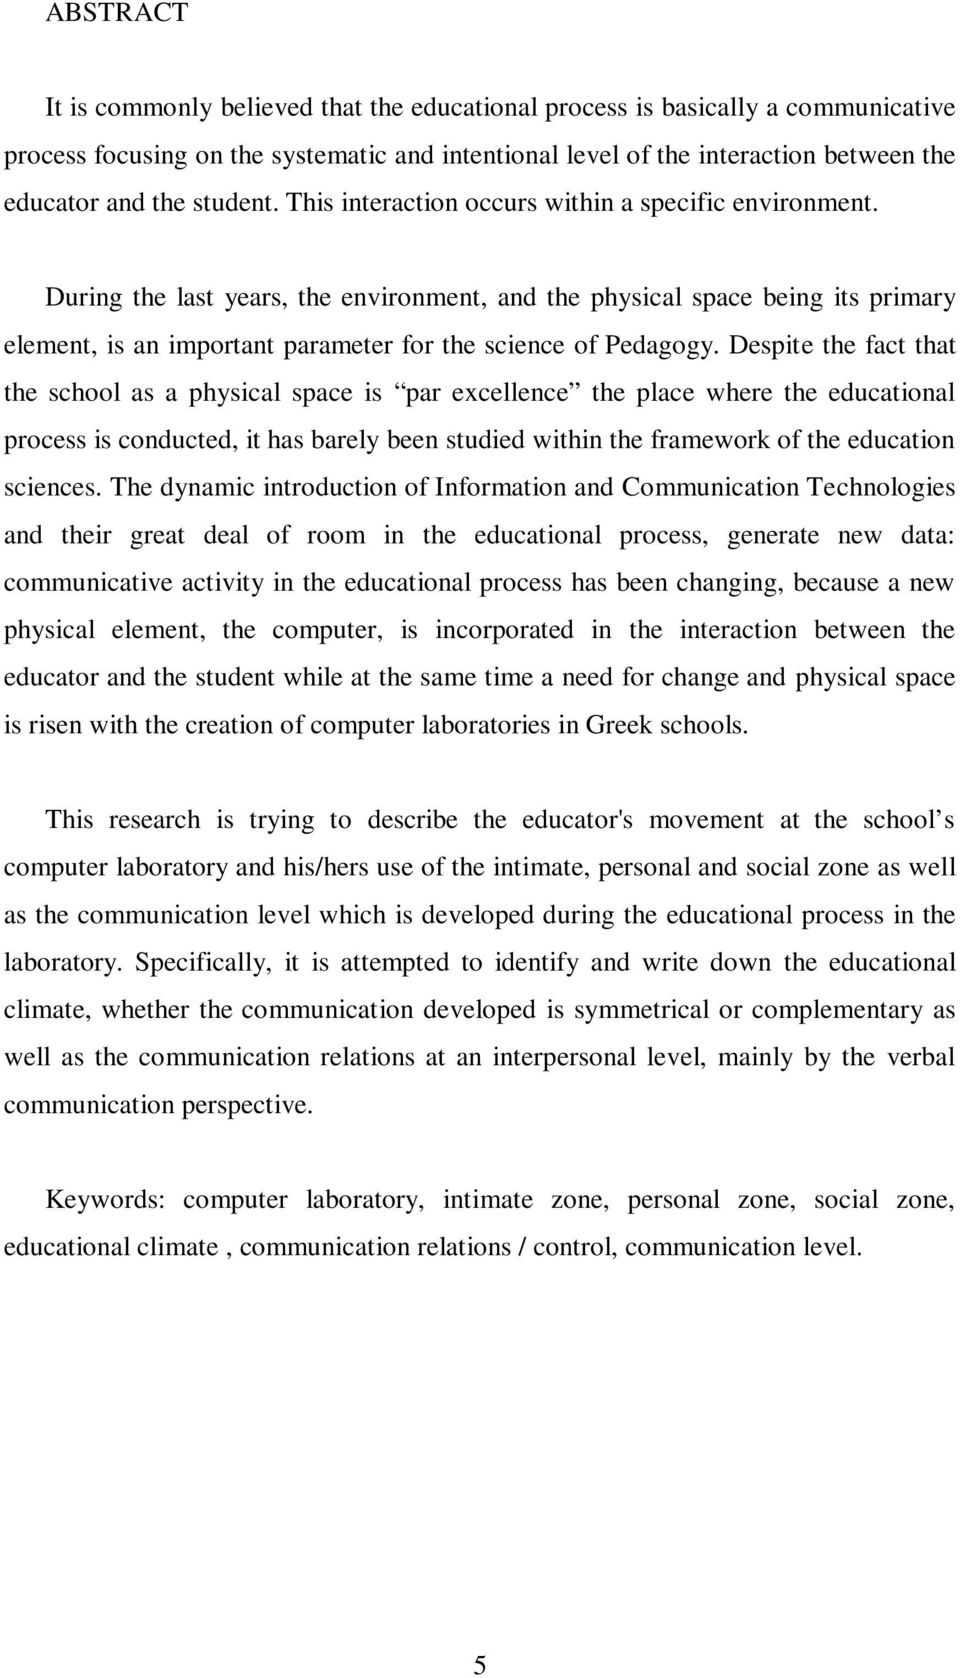 During the last years, the environment, and the physical space being its primary element, is an important parameter for the science of Pedagogy.